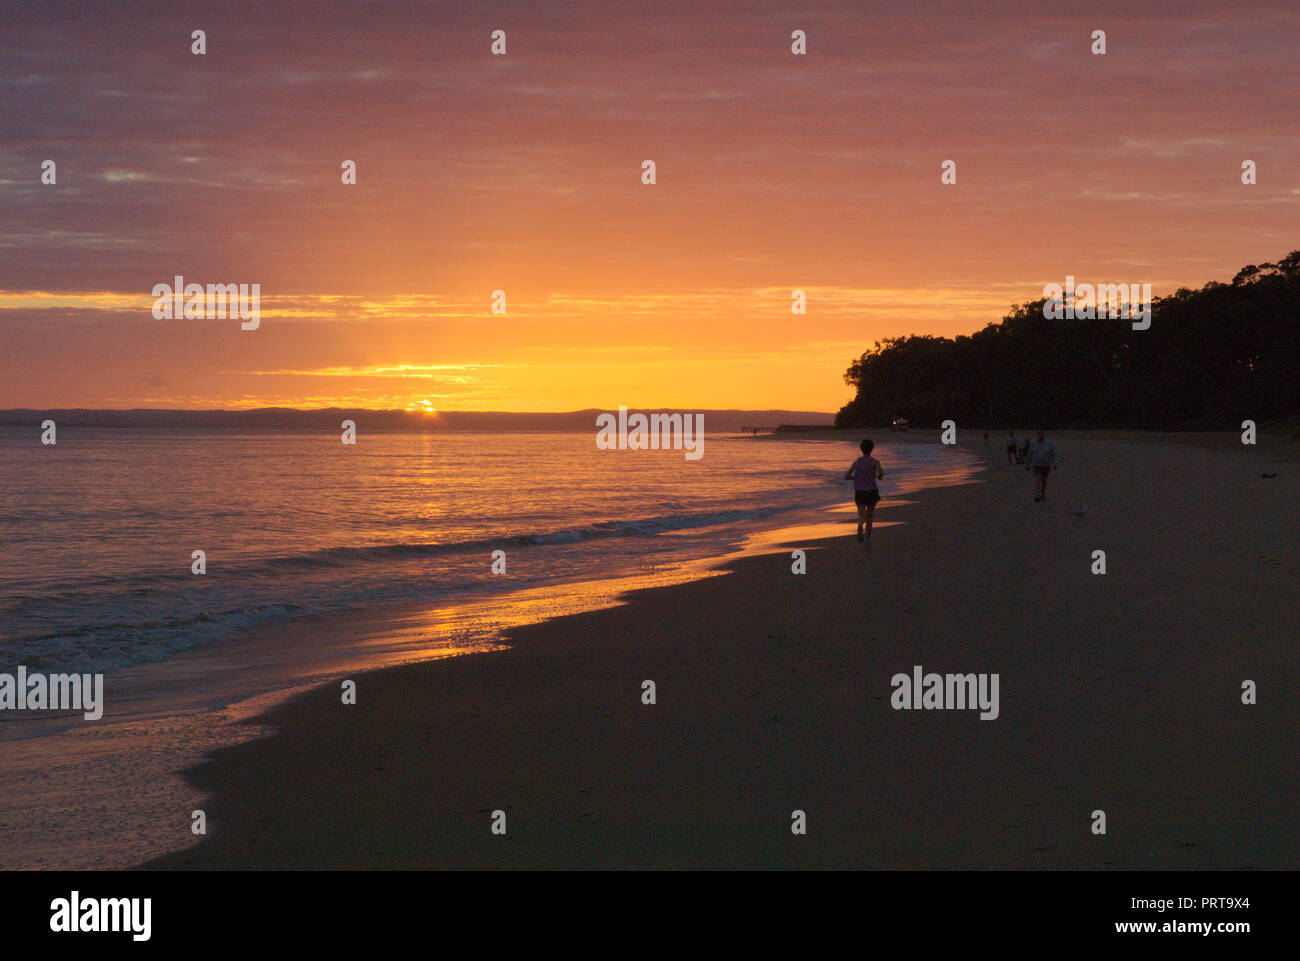 Sunset Over the Beach at Hervey Bay, Qld. Stock Photo